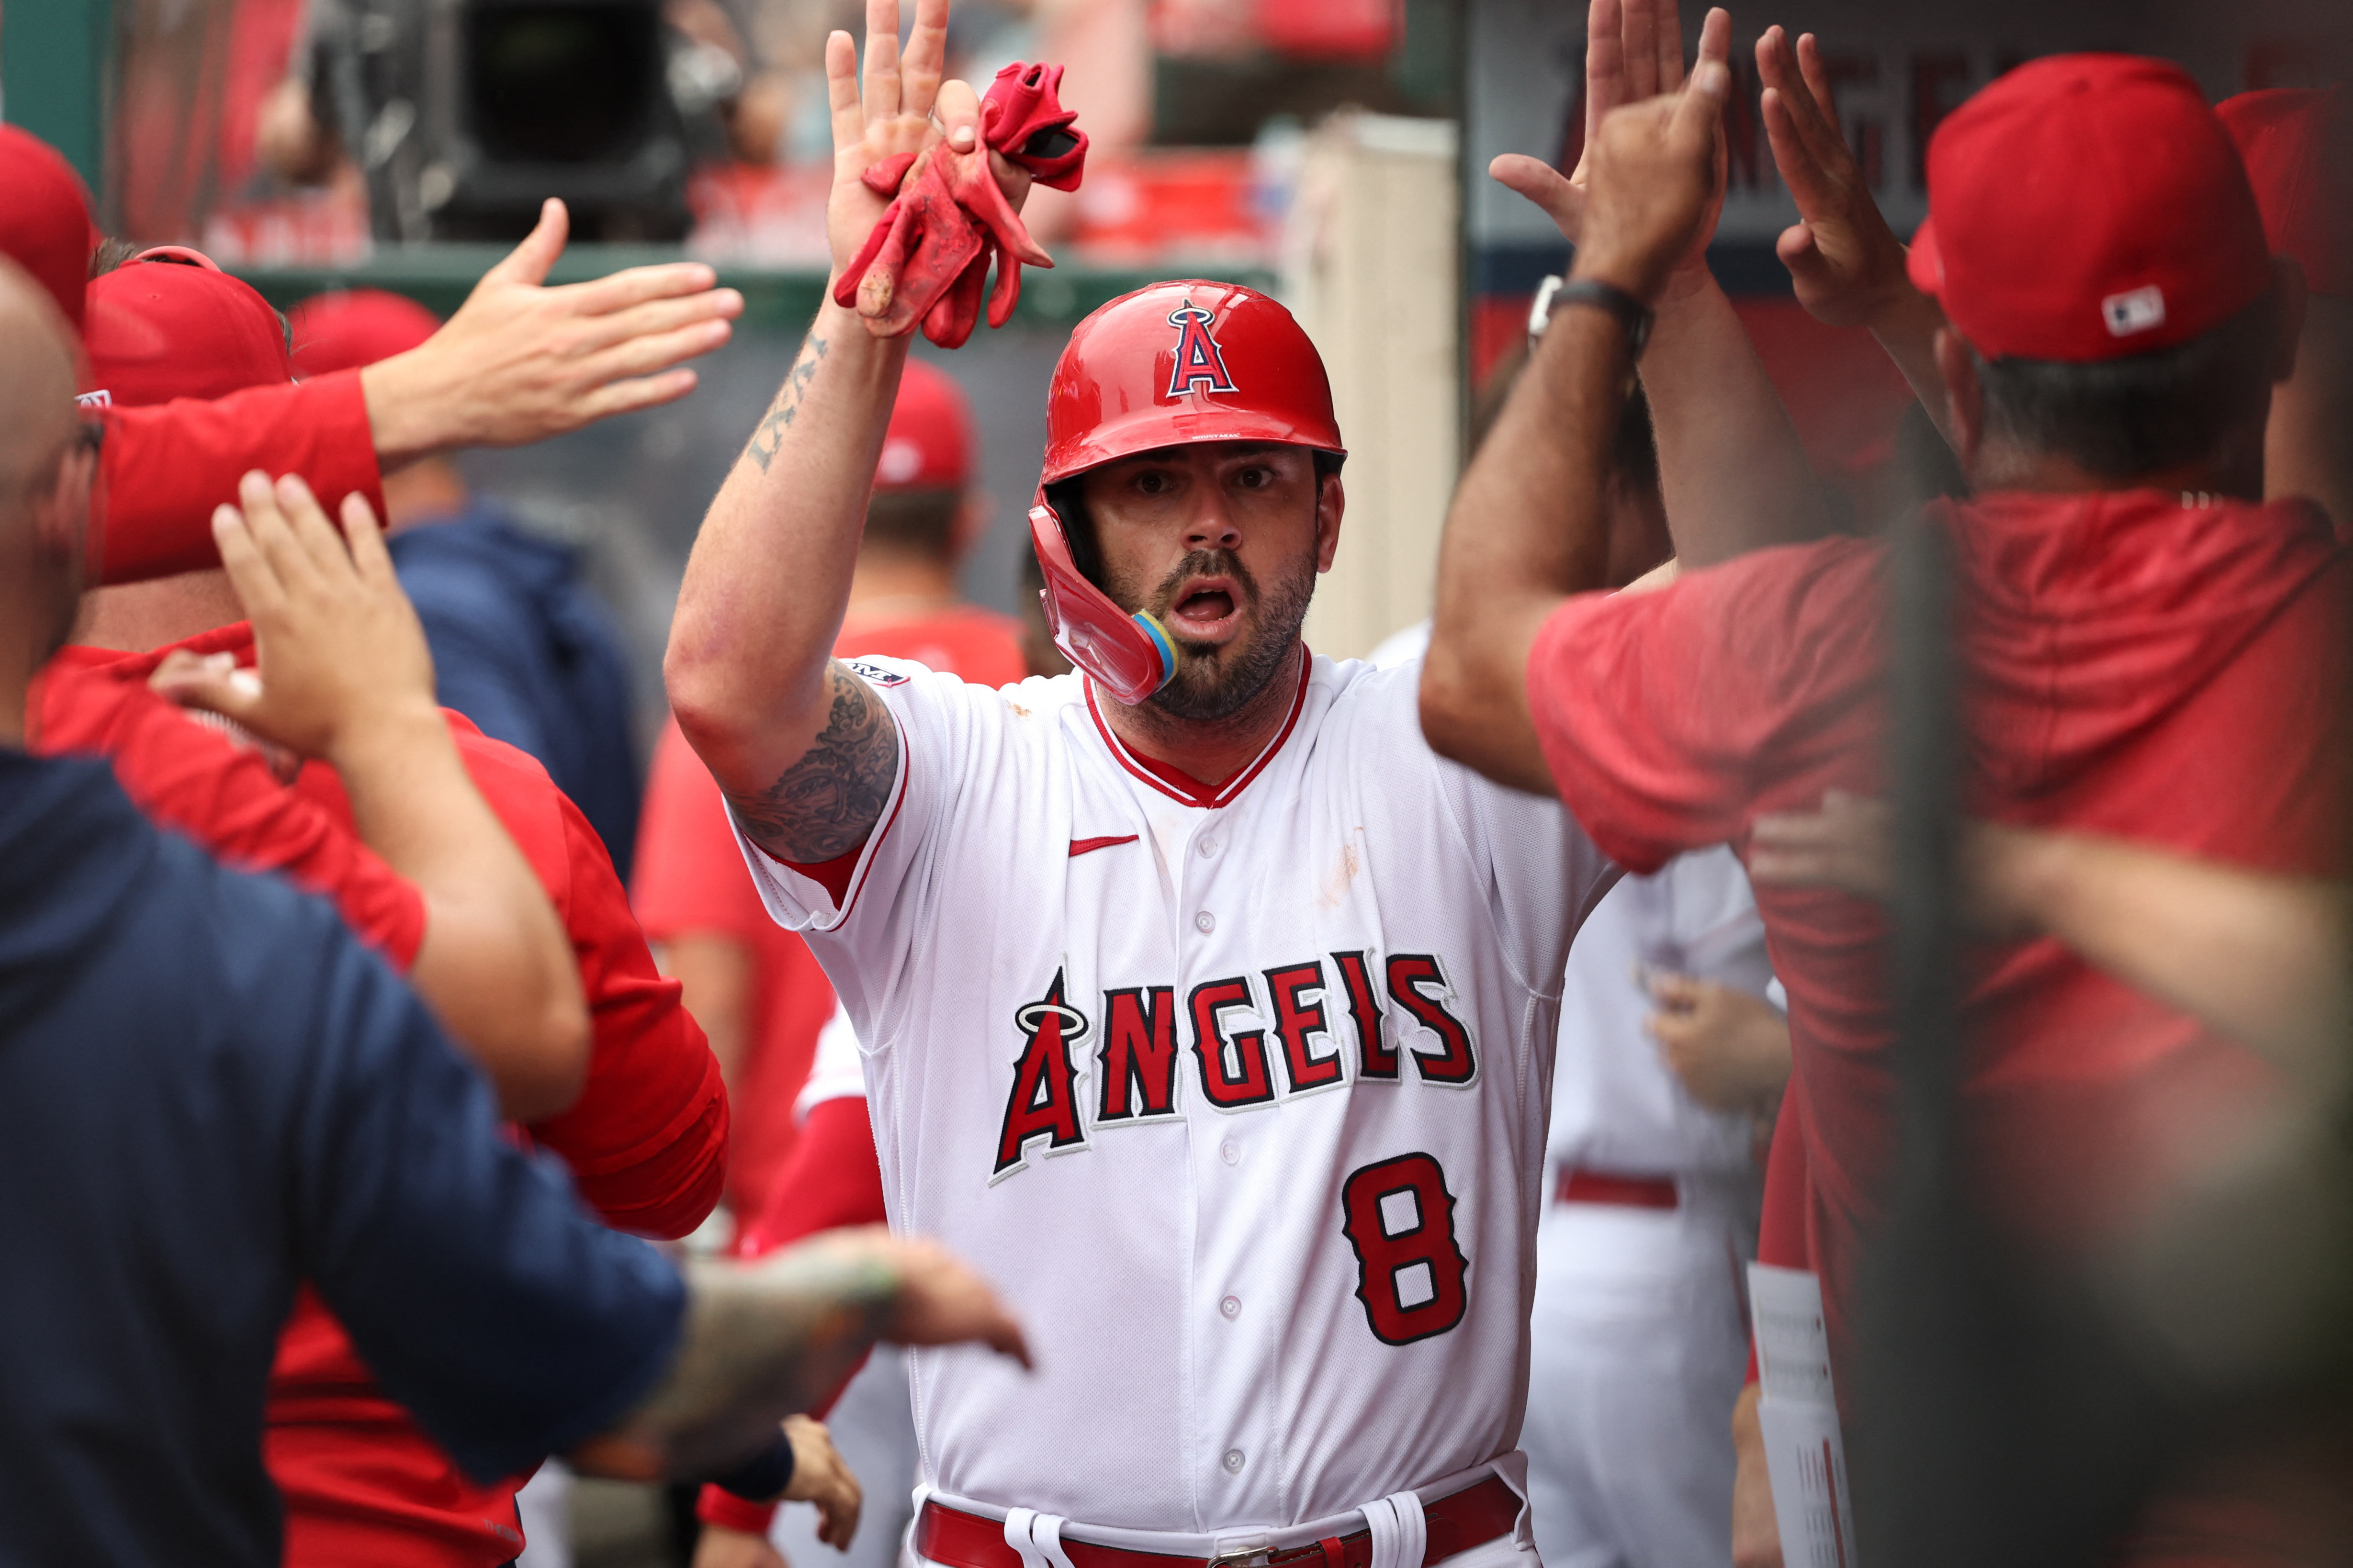 Angels hit four homers in win over Pirates